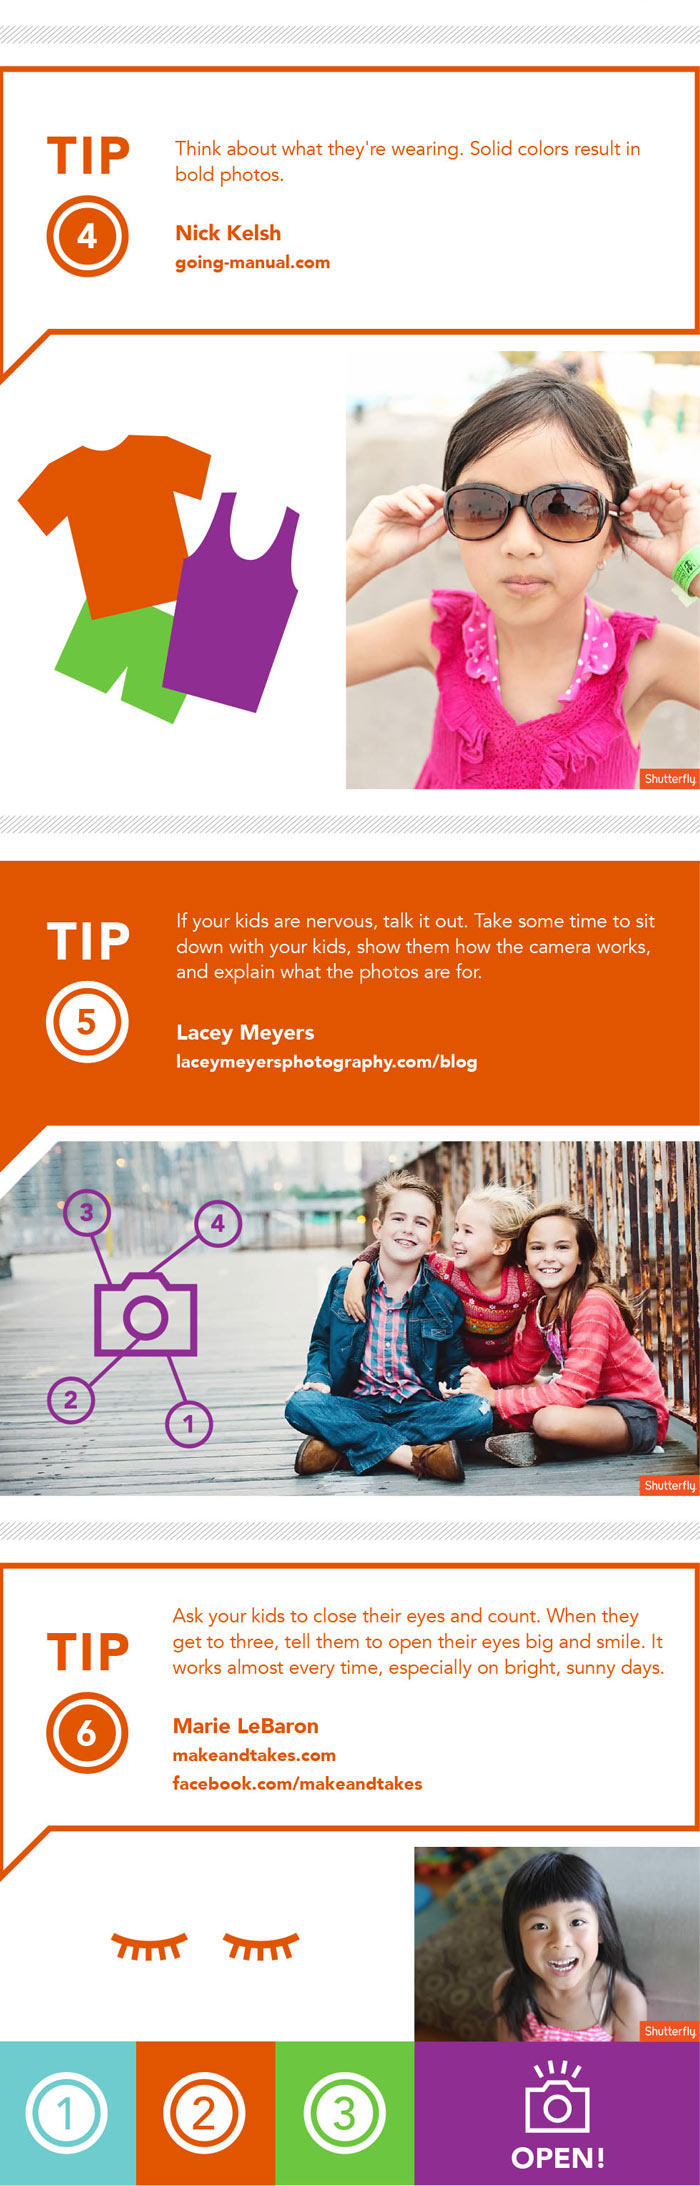 The Shutterfly Guide to Taking Photos of Wiggly Kids